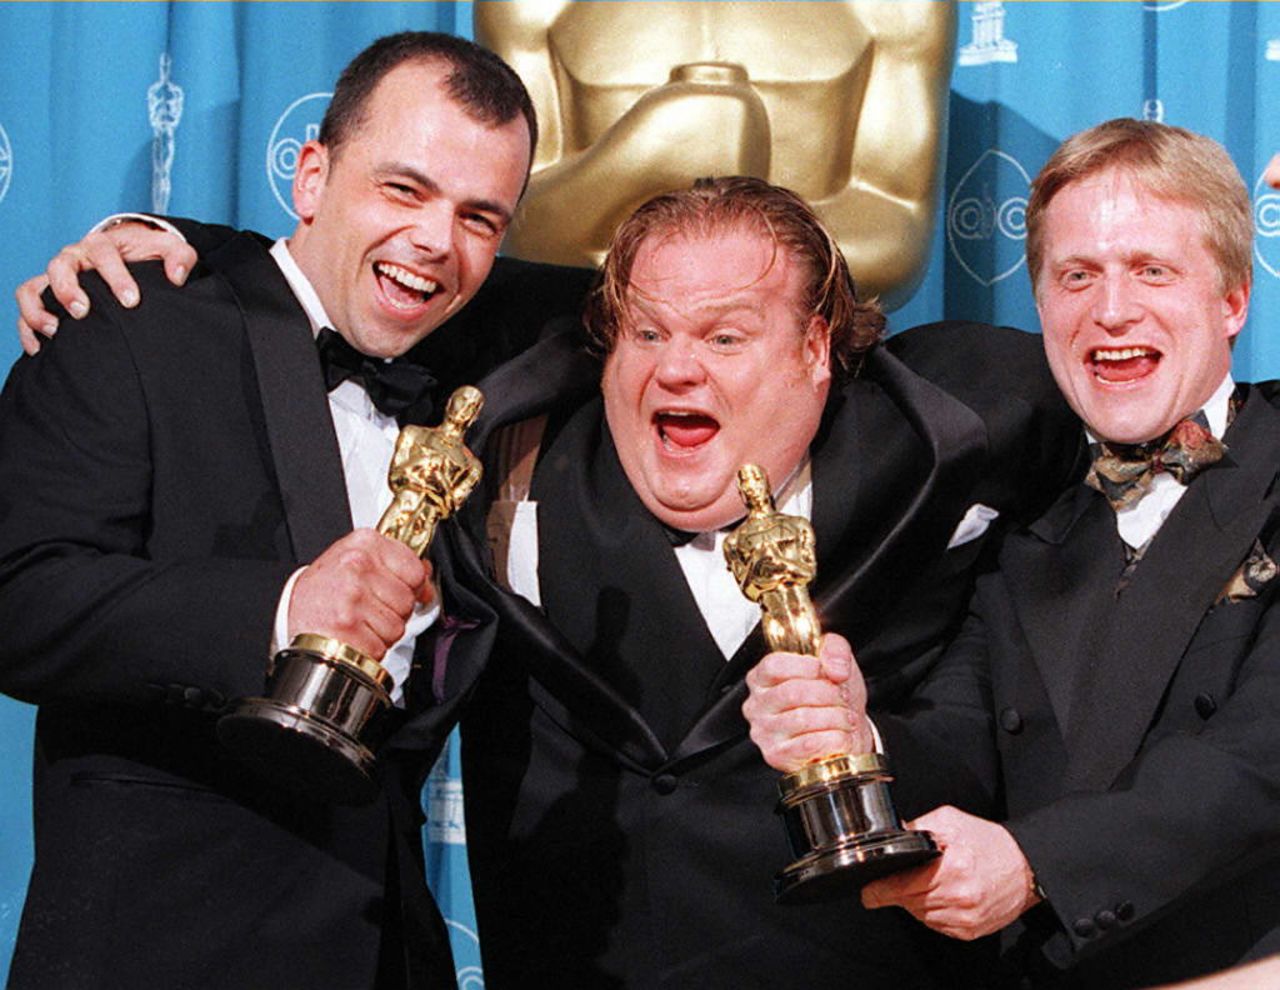 Chris Farley, at center with filmmakers Tyron Montgomery, left, and Thomas Stellmach after they won the Oscar for best animated short film for "Quest" in 1997. Farley was working on the animated film "Shrek" when he died of an overdose in 1997. His "SNL" colleague Mike Myers took over the role. Here's a look at other celebrities who have died during the production of movies and TV shows.